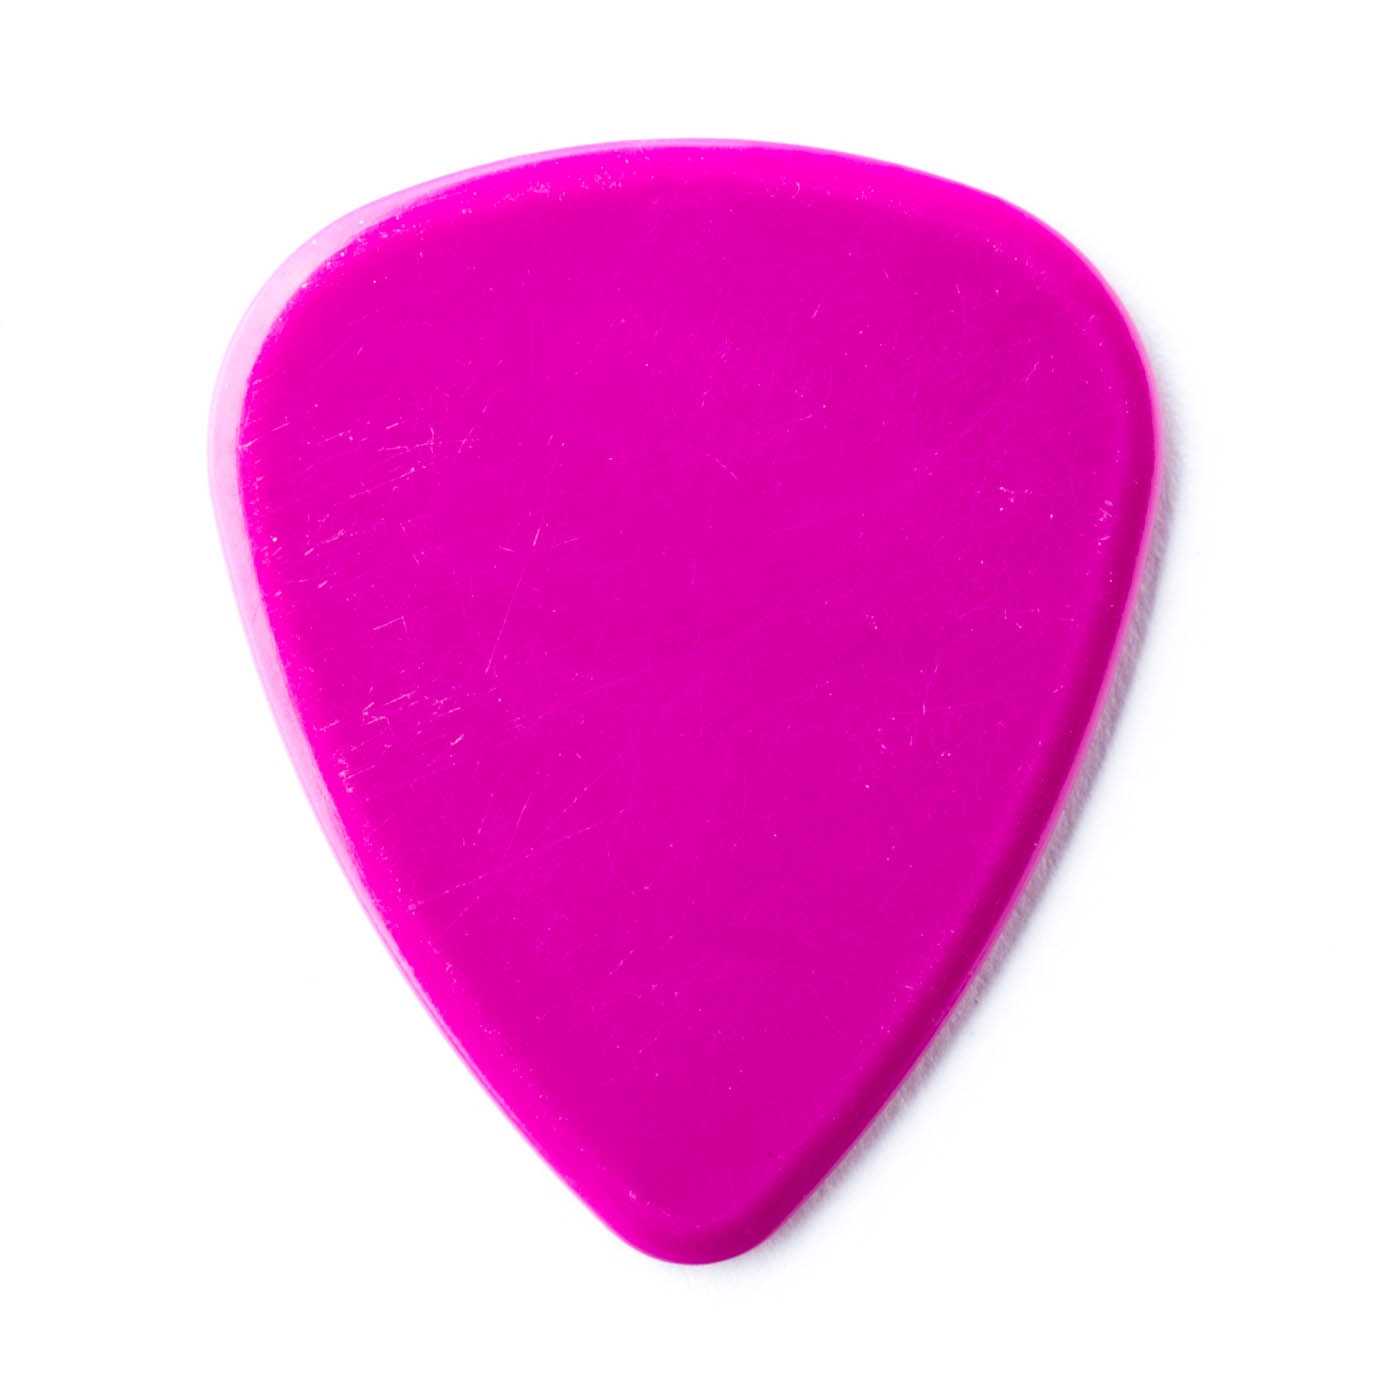 Image 2 of Dunlop Delrin 500 Standard 1.14MM Flatpick Player's Pack, 12 Picks - SKU# PK41P-114 : Product Type Accessories & Parts : Elderly Instruments